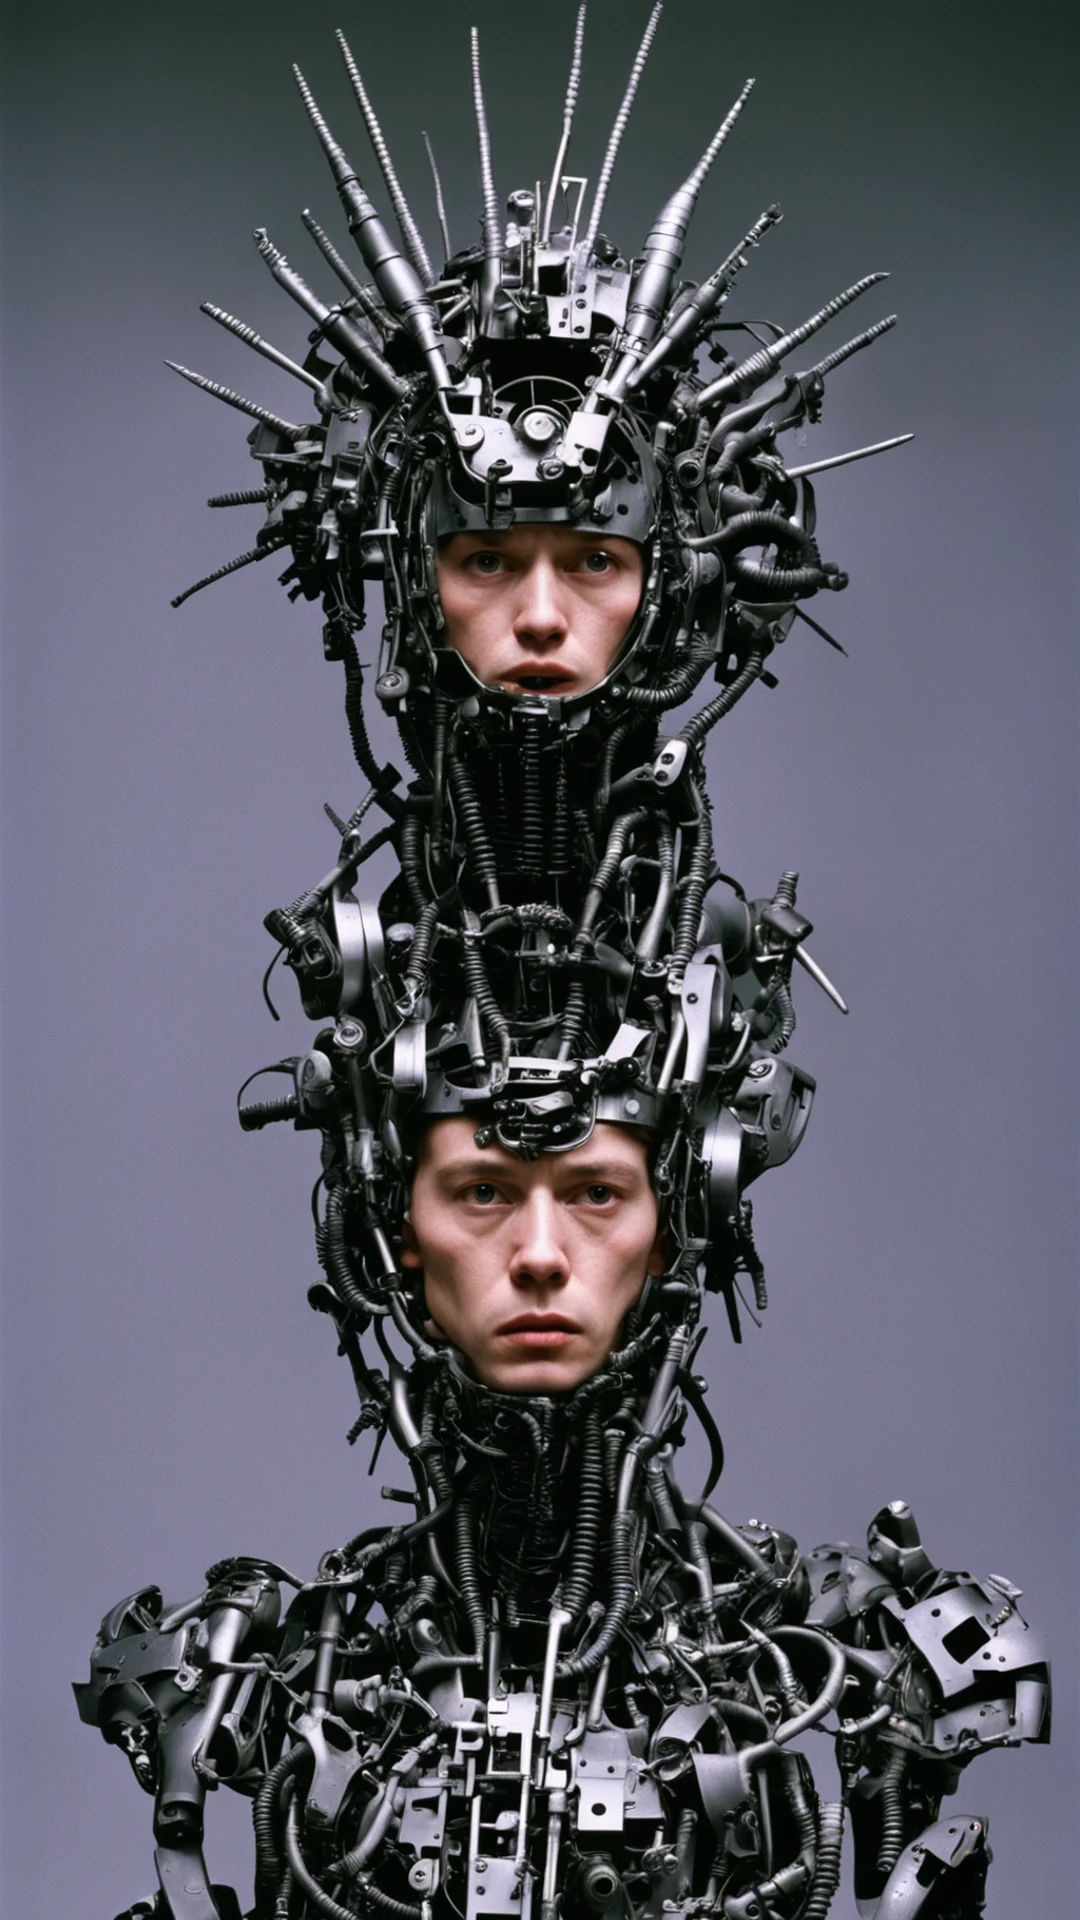 aifrom movie event horizon 1997 from movie tetsuo 1989 from movie virus 1999 london andrews wearing bird head made of machine parts amazing awesome portrait 2 tall